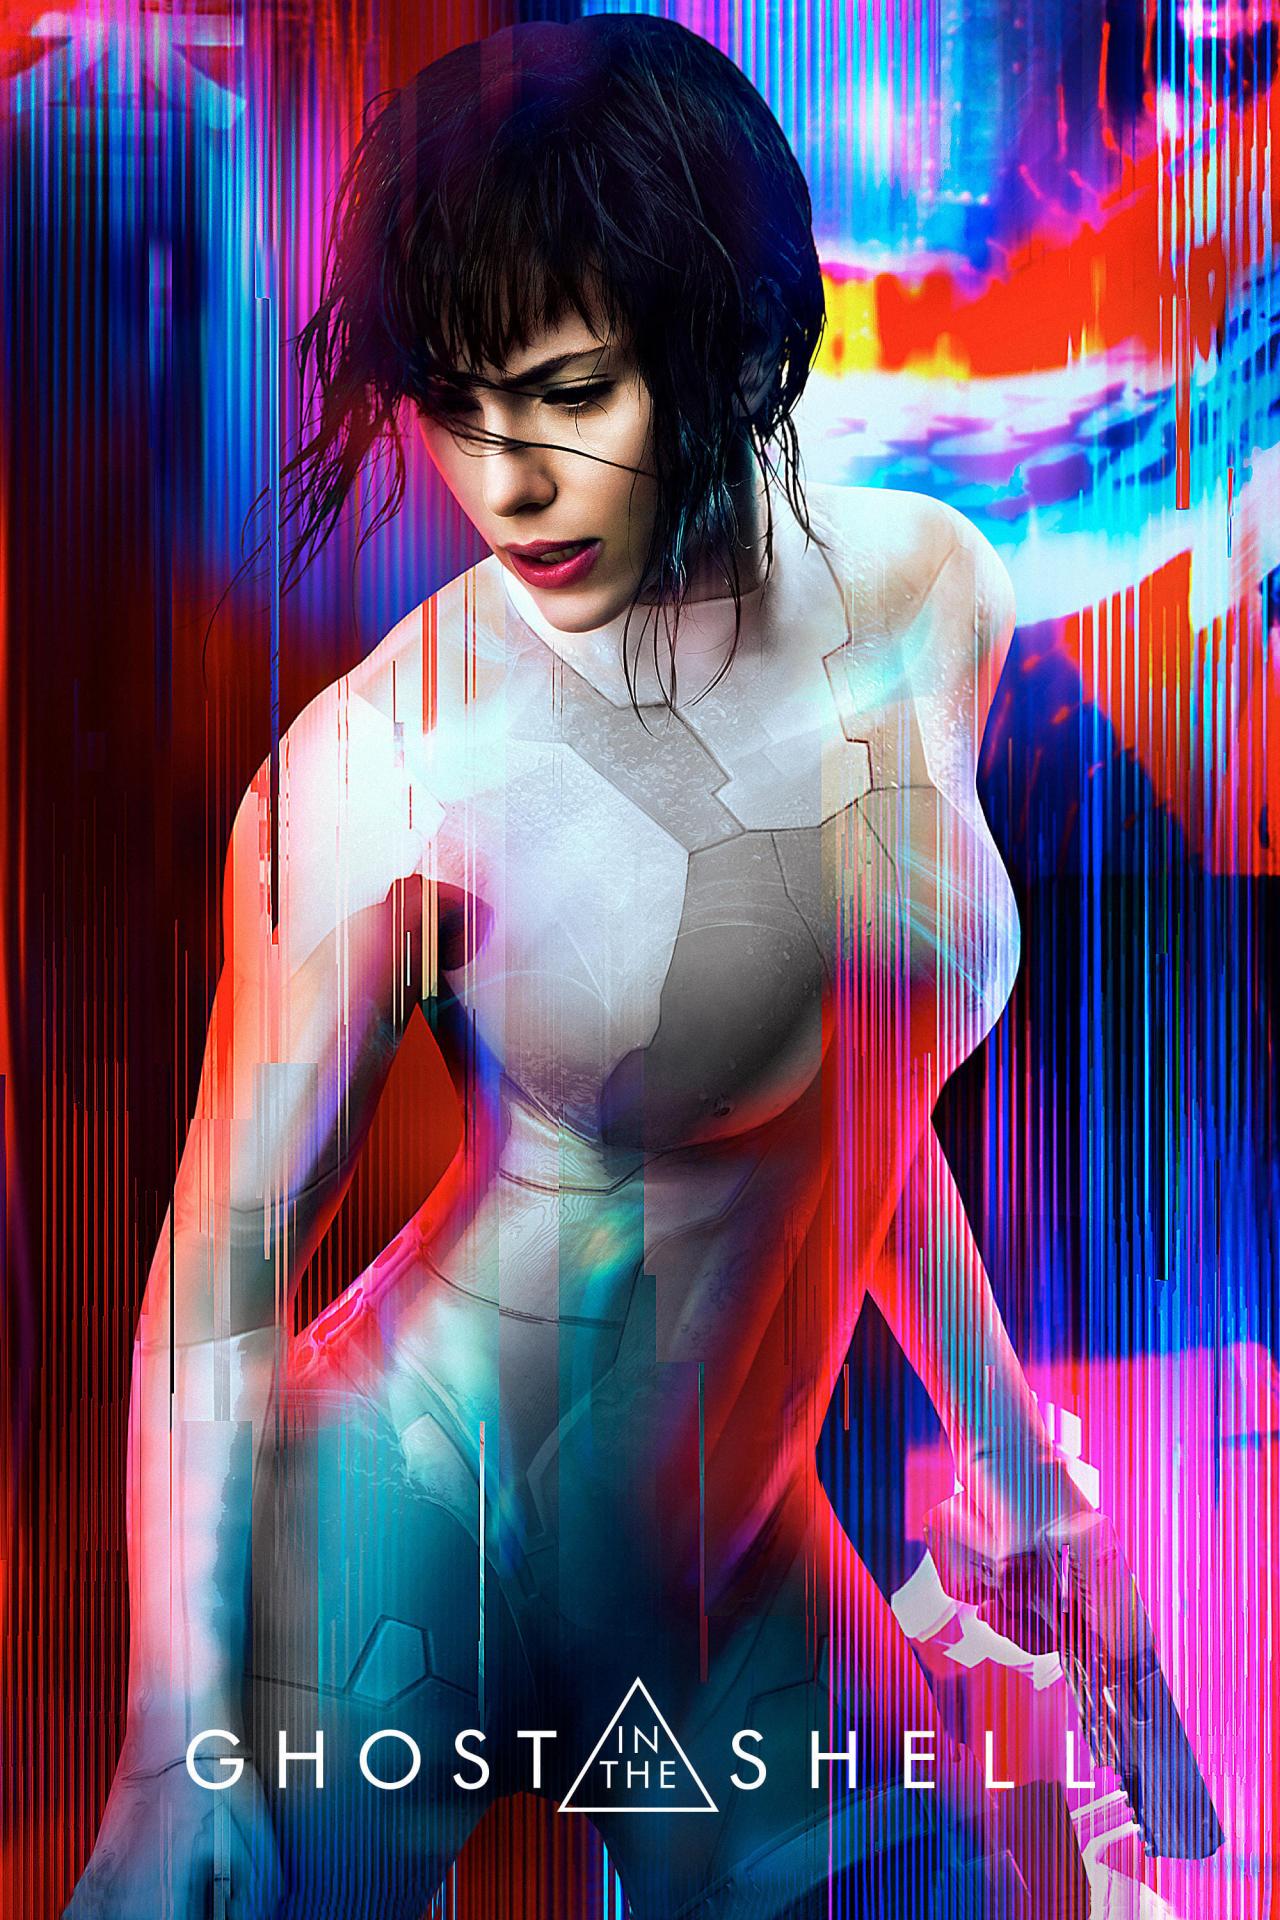 Affiche du film Ghost in the Shell poster